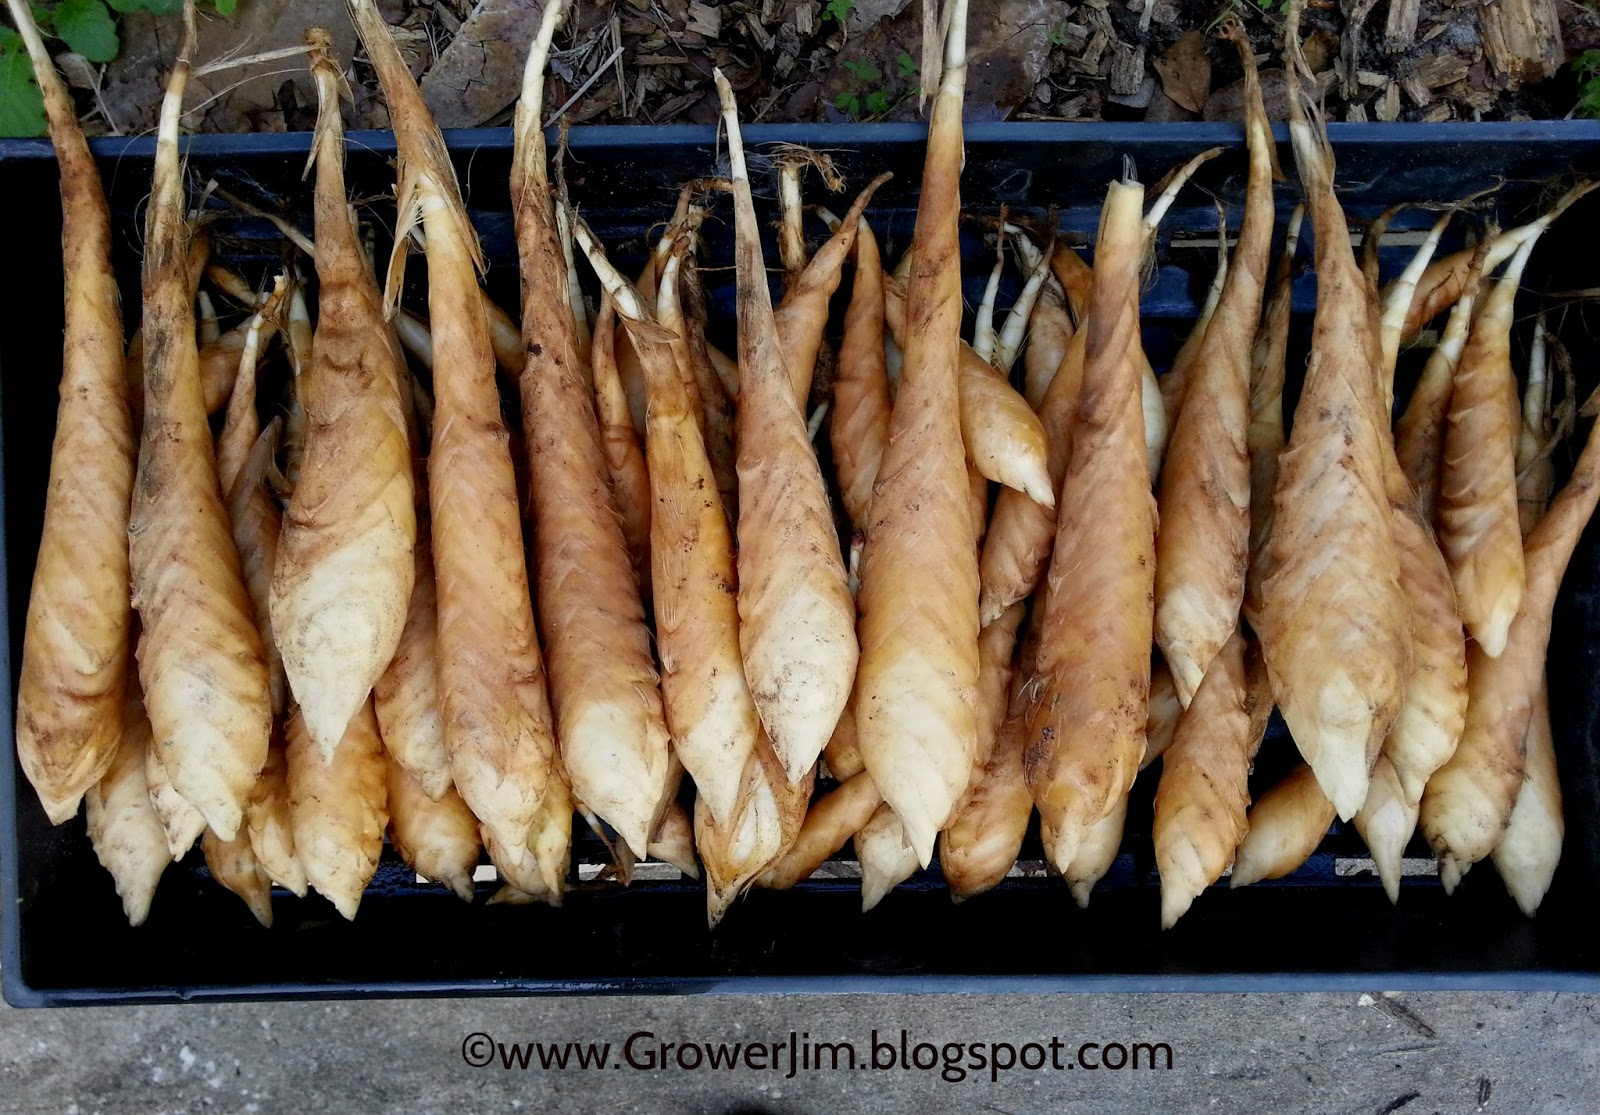 Arrowroot, Tuber, Edible Starch & Culinary Uses